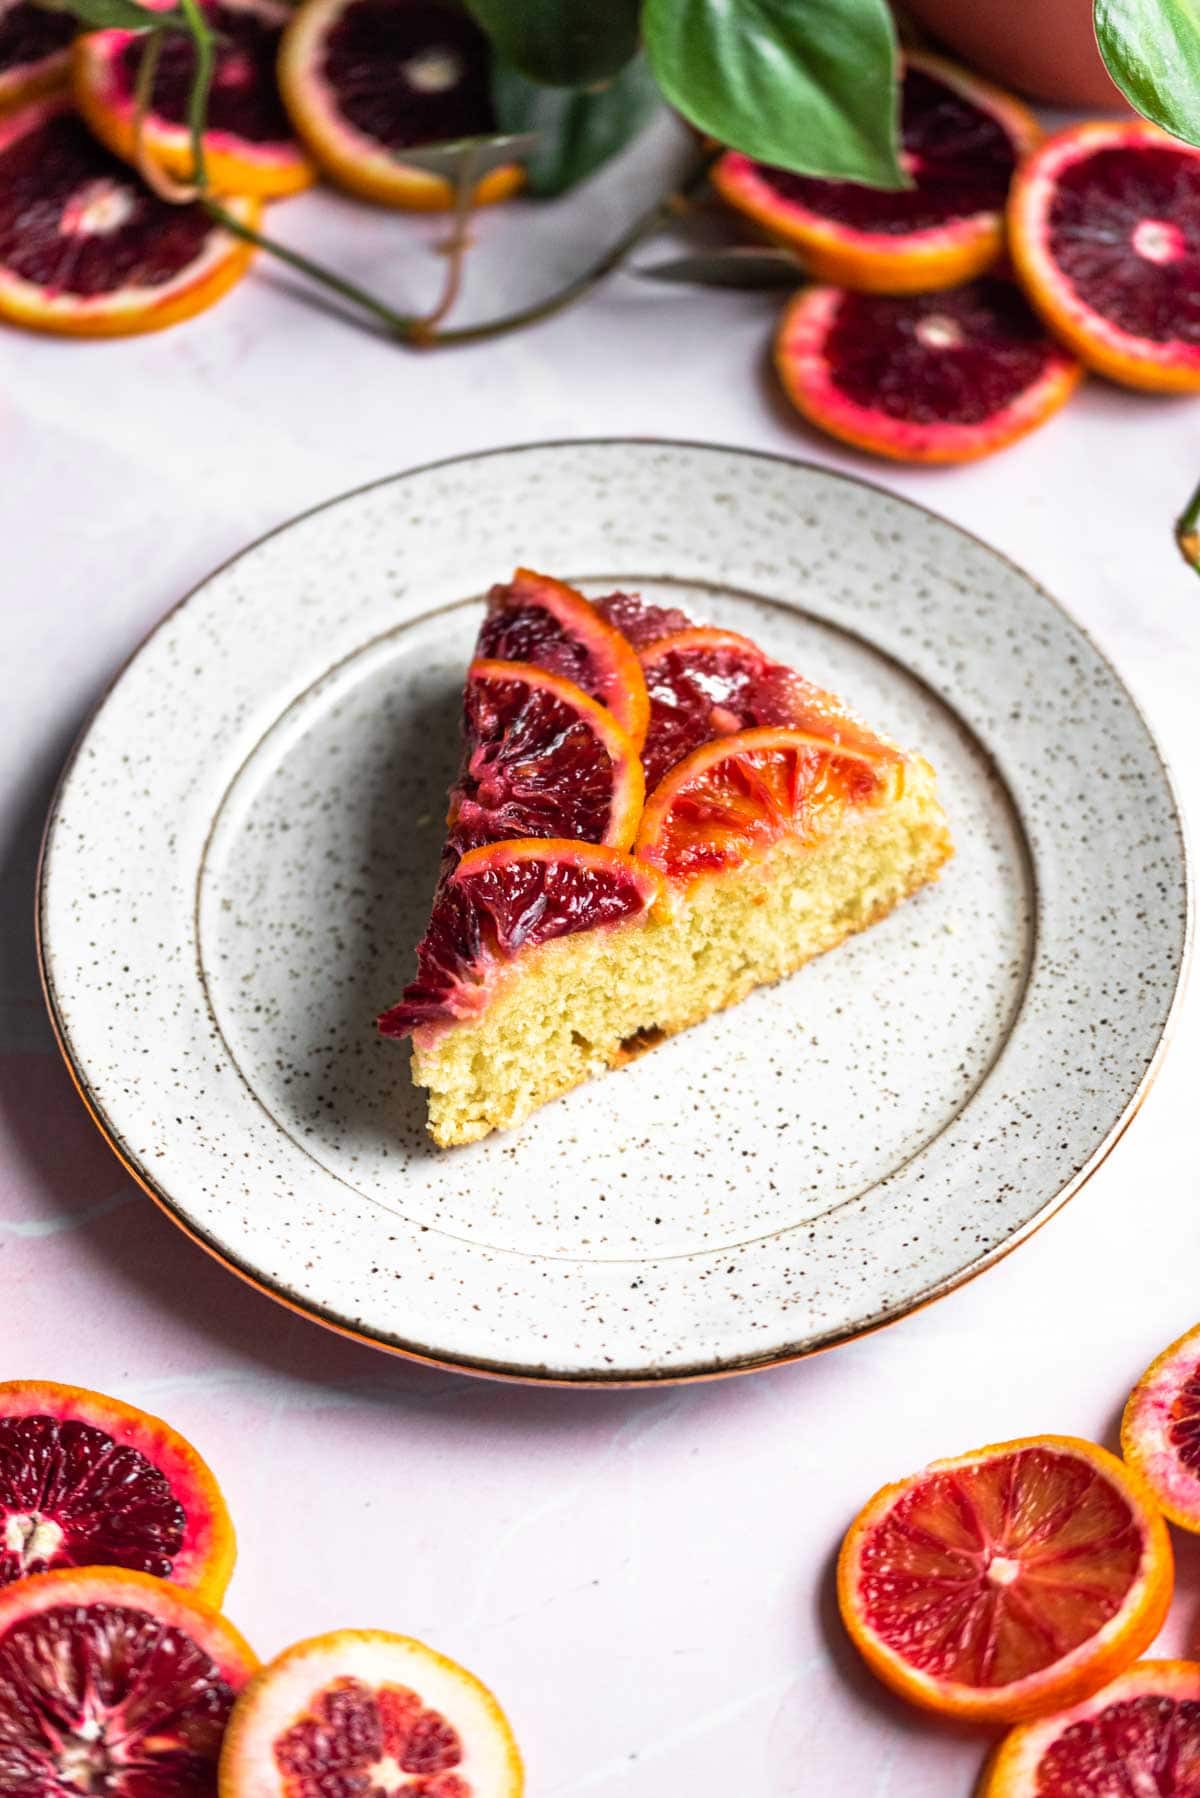 A slice of blood orange upside down cake on a plate and with orange slices in the corner of the photo.